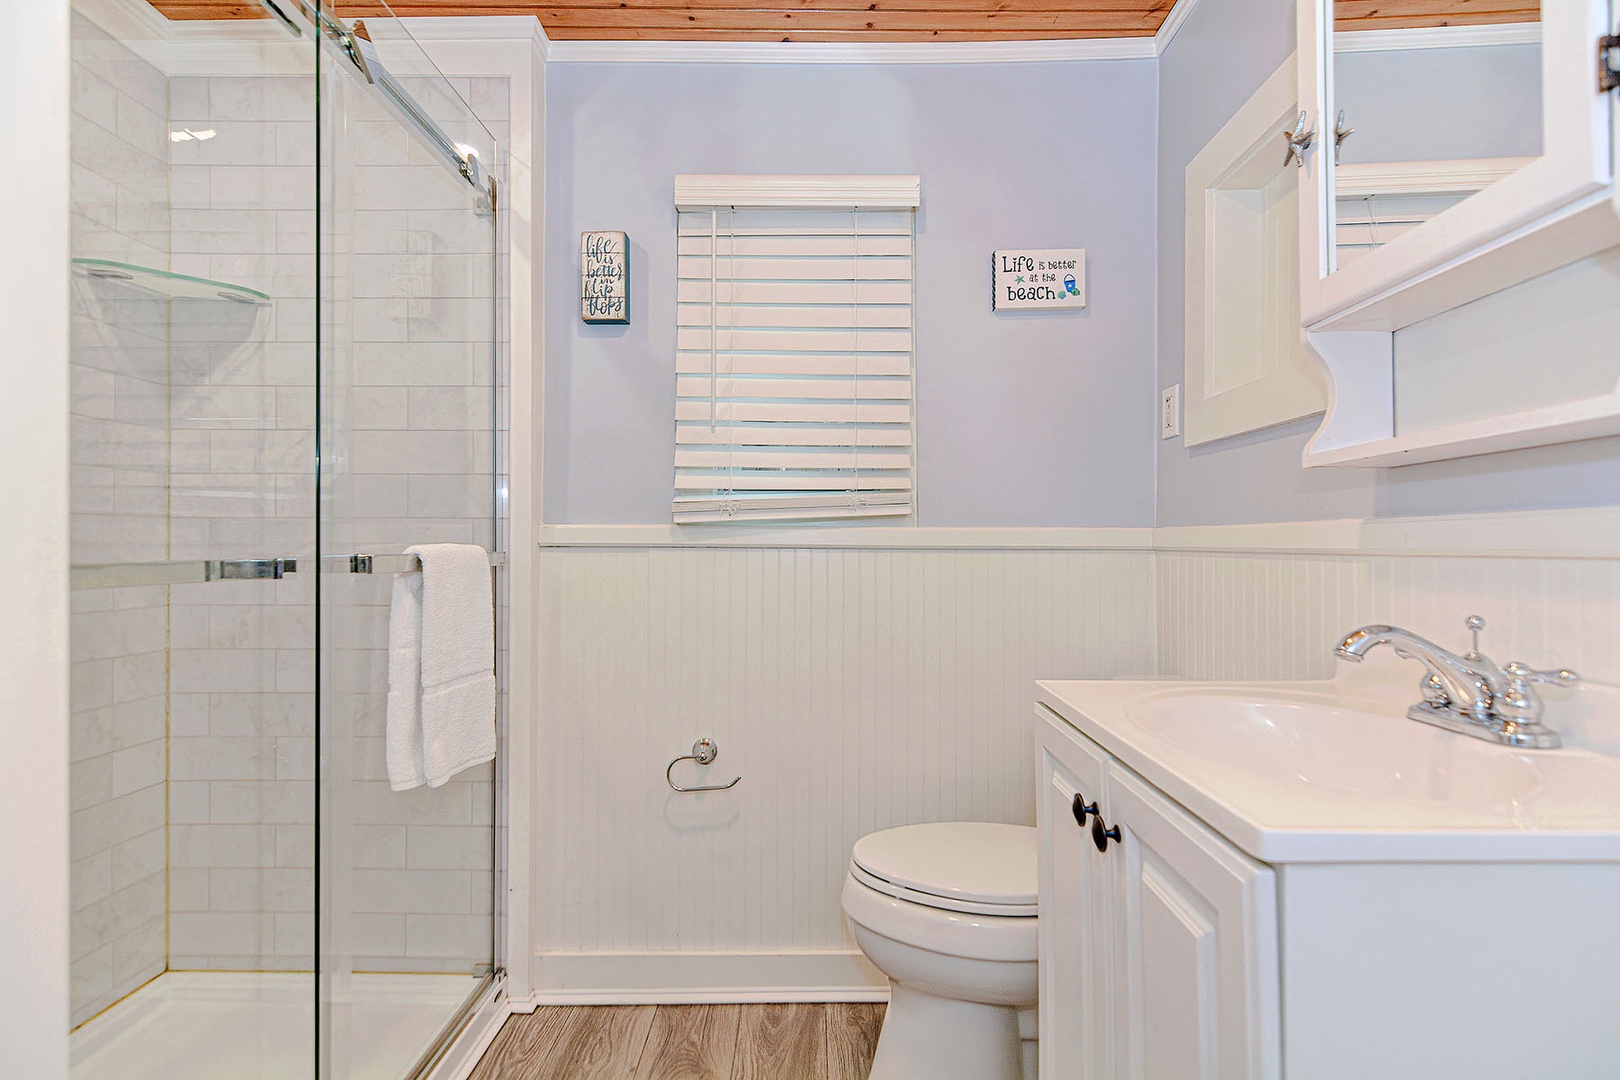 Main level full bath with walk-in shower and laundry unit.